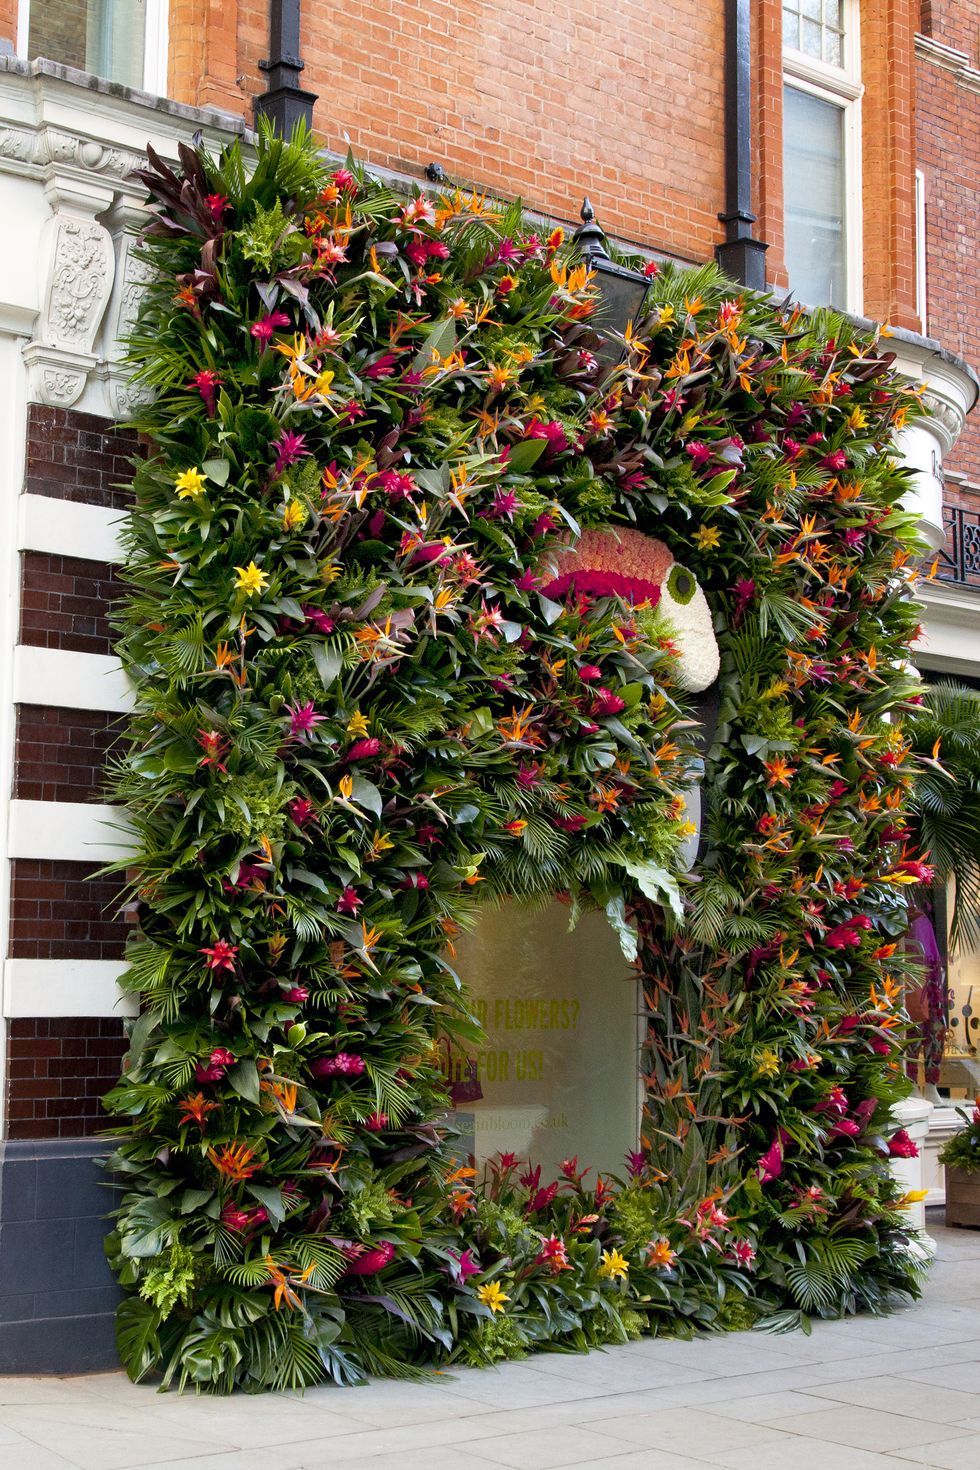 <p>This year's Chelsea in Bloom festival runs from 23 to 28 May, drawing visitors to the area with carnival-inspired floral displays, events and menus across 39 of the neighbourhood's stores. The retailers – including Club Monaco, Liz Earle and Yves Delorme – will compete to create stunning displays made of fresh flowers, spilling from store windows onto pavements. Visitors can start their journey at Sloane Square, before hitching a free rickshaw tour of the Chelsea in Bloom trail. Alternatively, you can pick up a map to see the sights on foot. <em>Visit <a href="http://chelseainbloom.co.uk">chelseainbloom.co.uk</a>.</em></p><p><em>Image courtesy of Chelsea in Bloom</em></p>